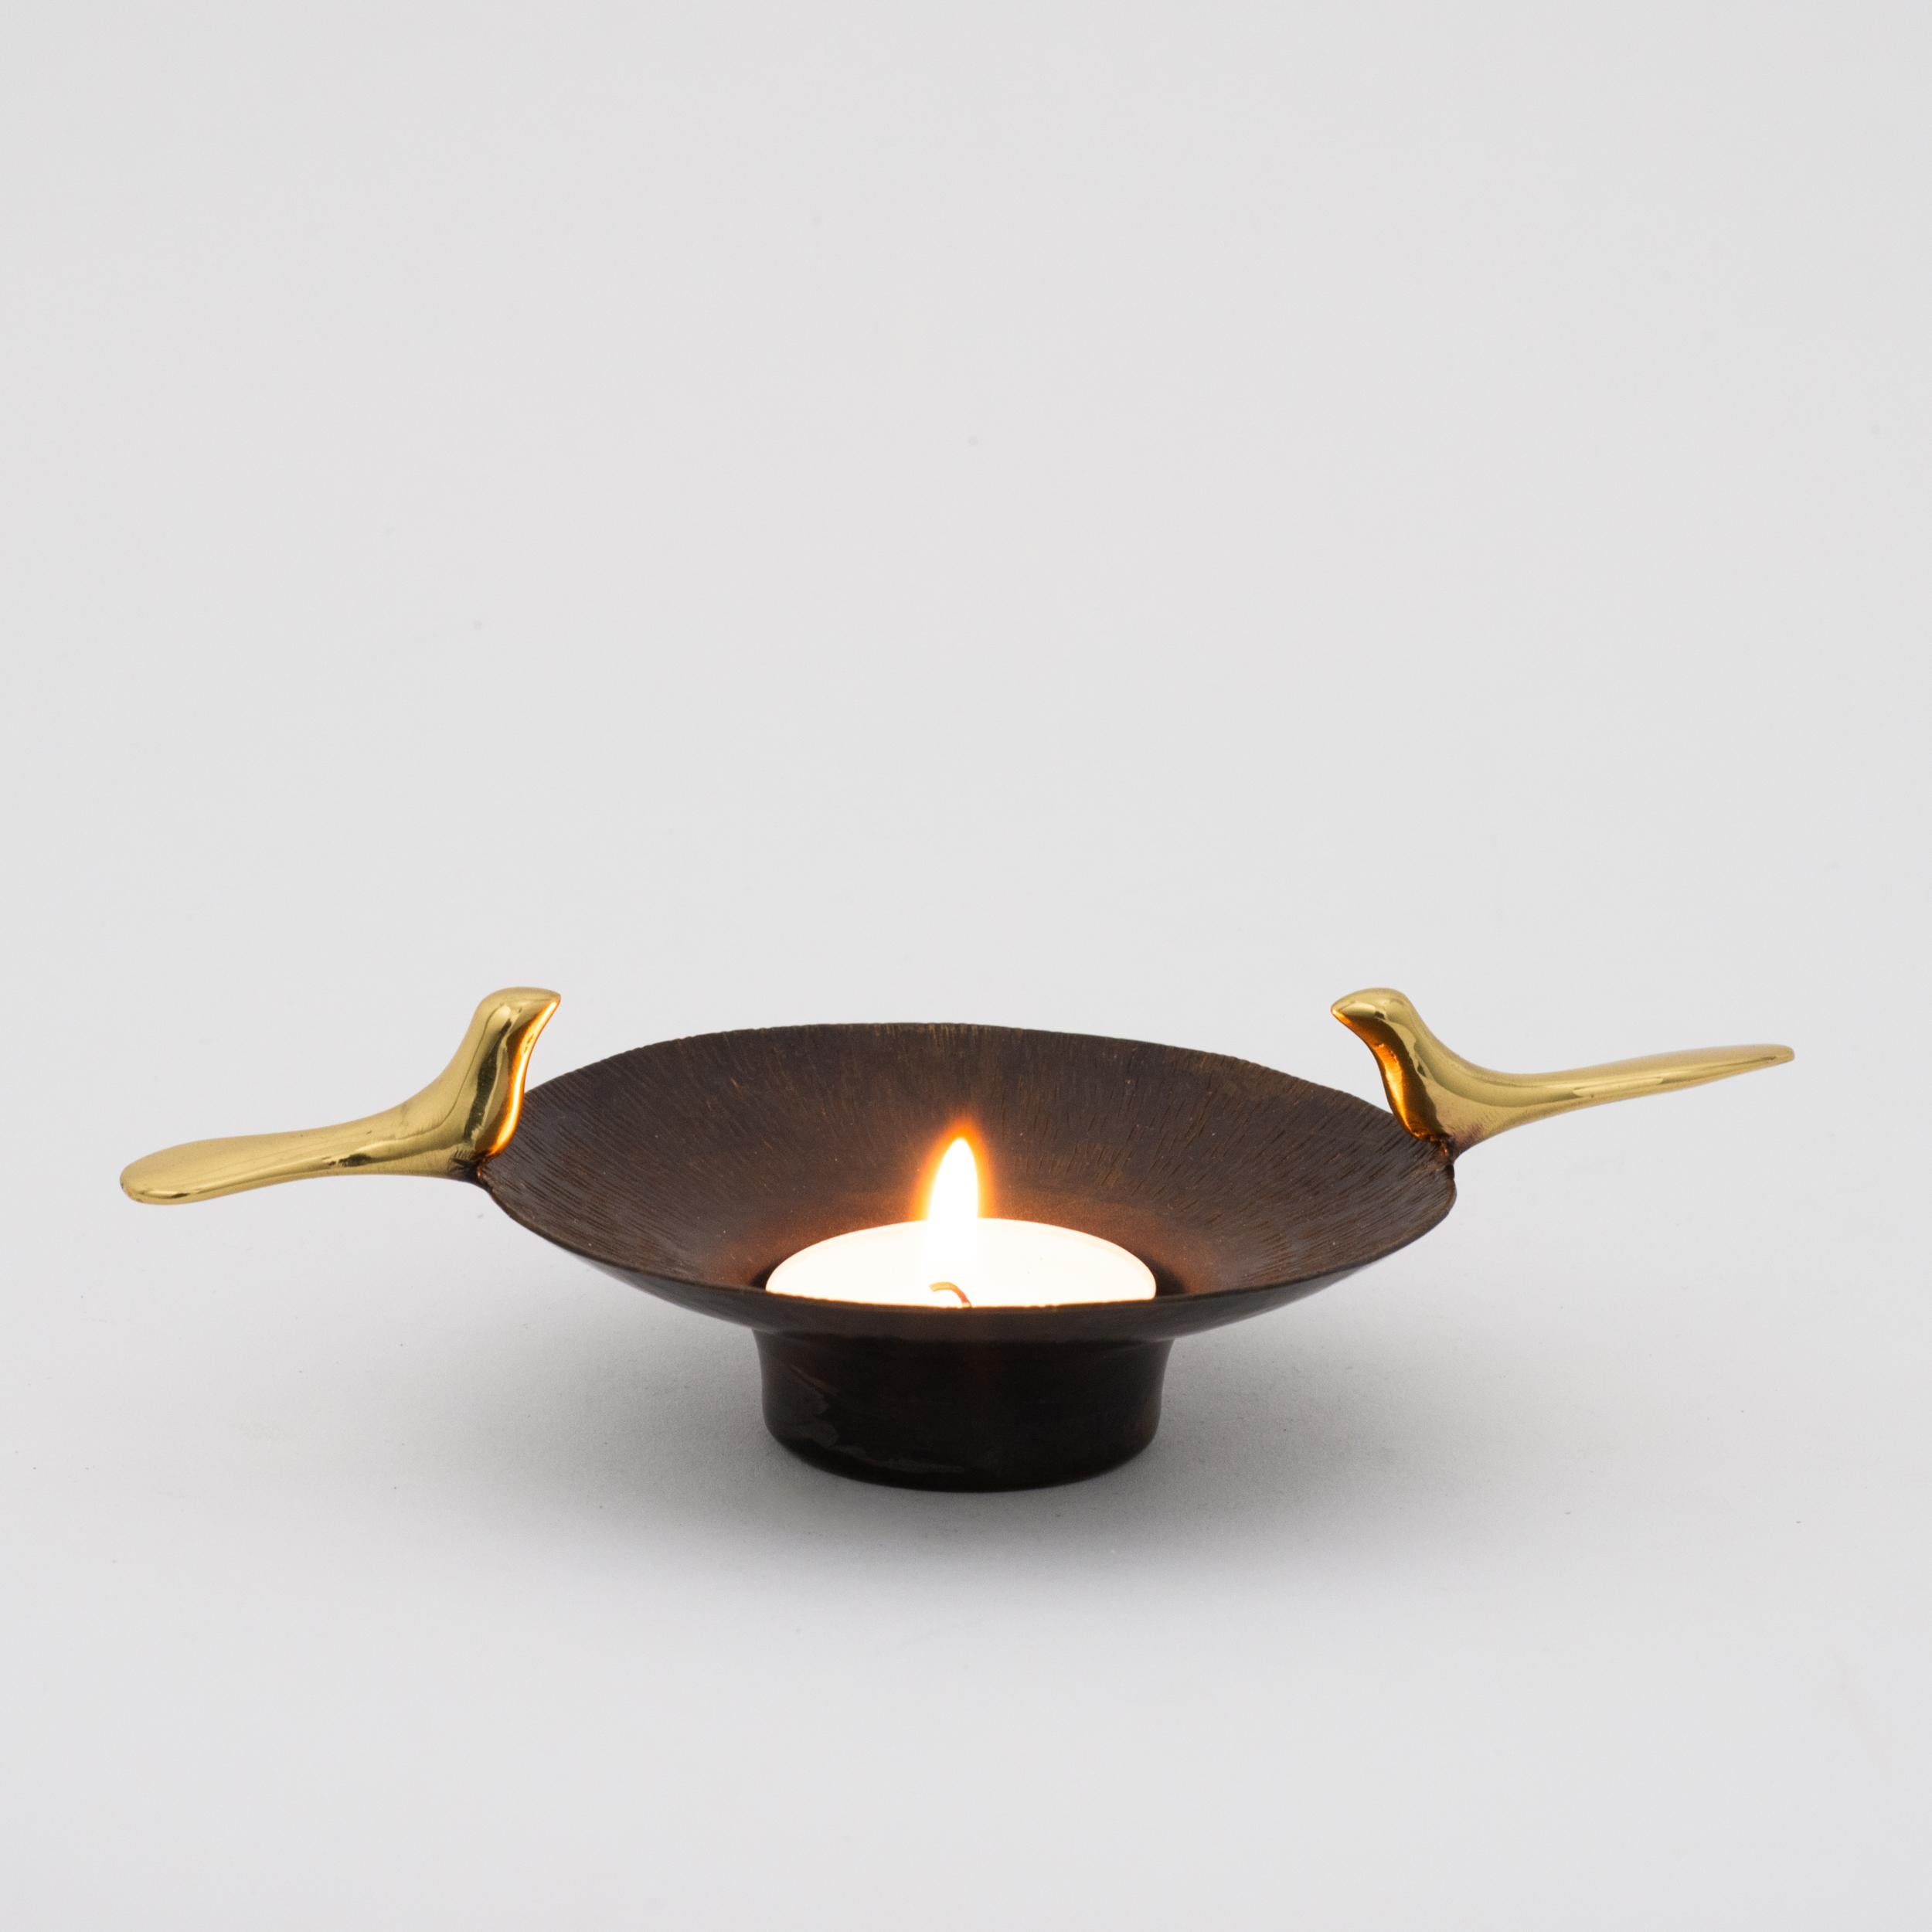 Set of three, beautifully made brass tea light holders adorning a beautiful texture with bronze patina finish. The birds are all individually cast in brass using very traditional techniques and polished to obtain a very lustrous surface.

Those